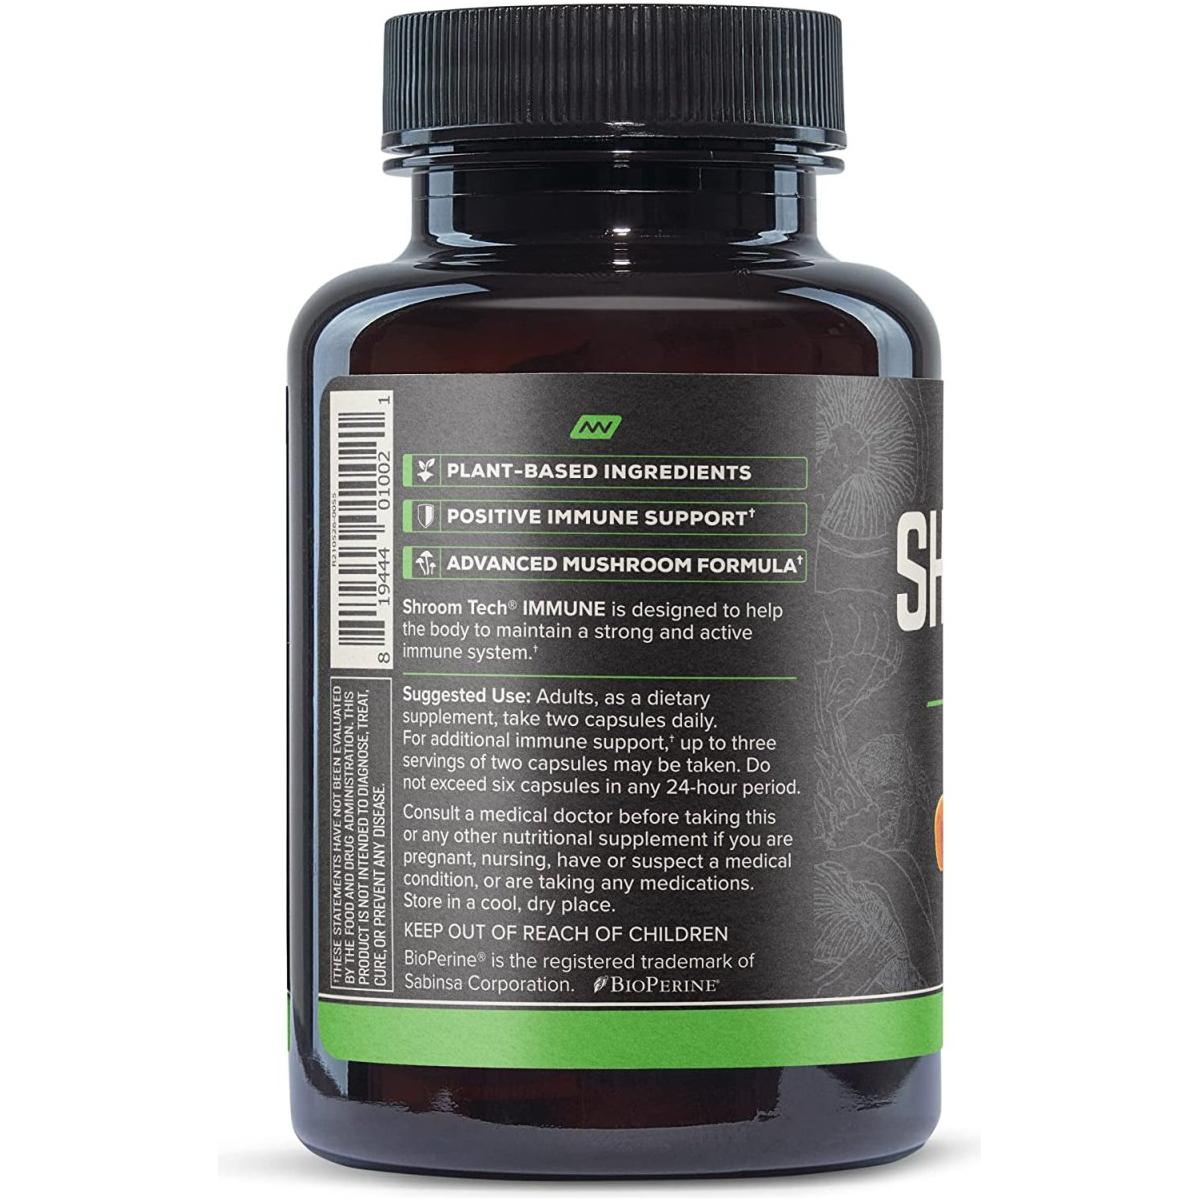 Onnit Shroom Tech IMMUNE: Daily Immune Support Supplement with Chaga Mushroom (30Ct) - Glam Global UK